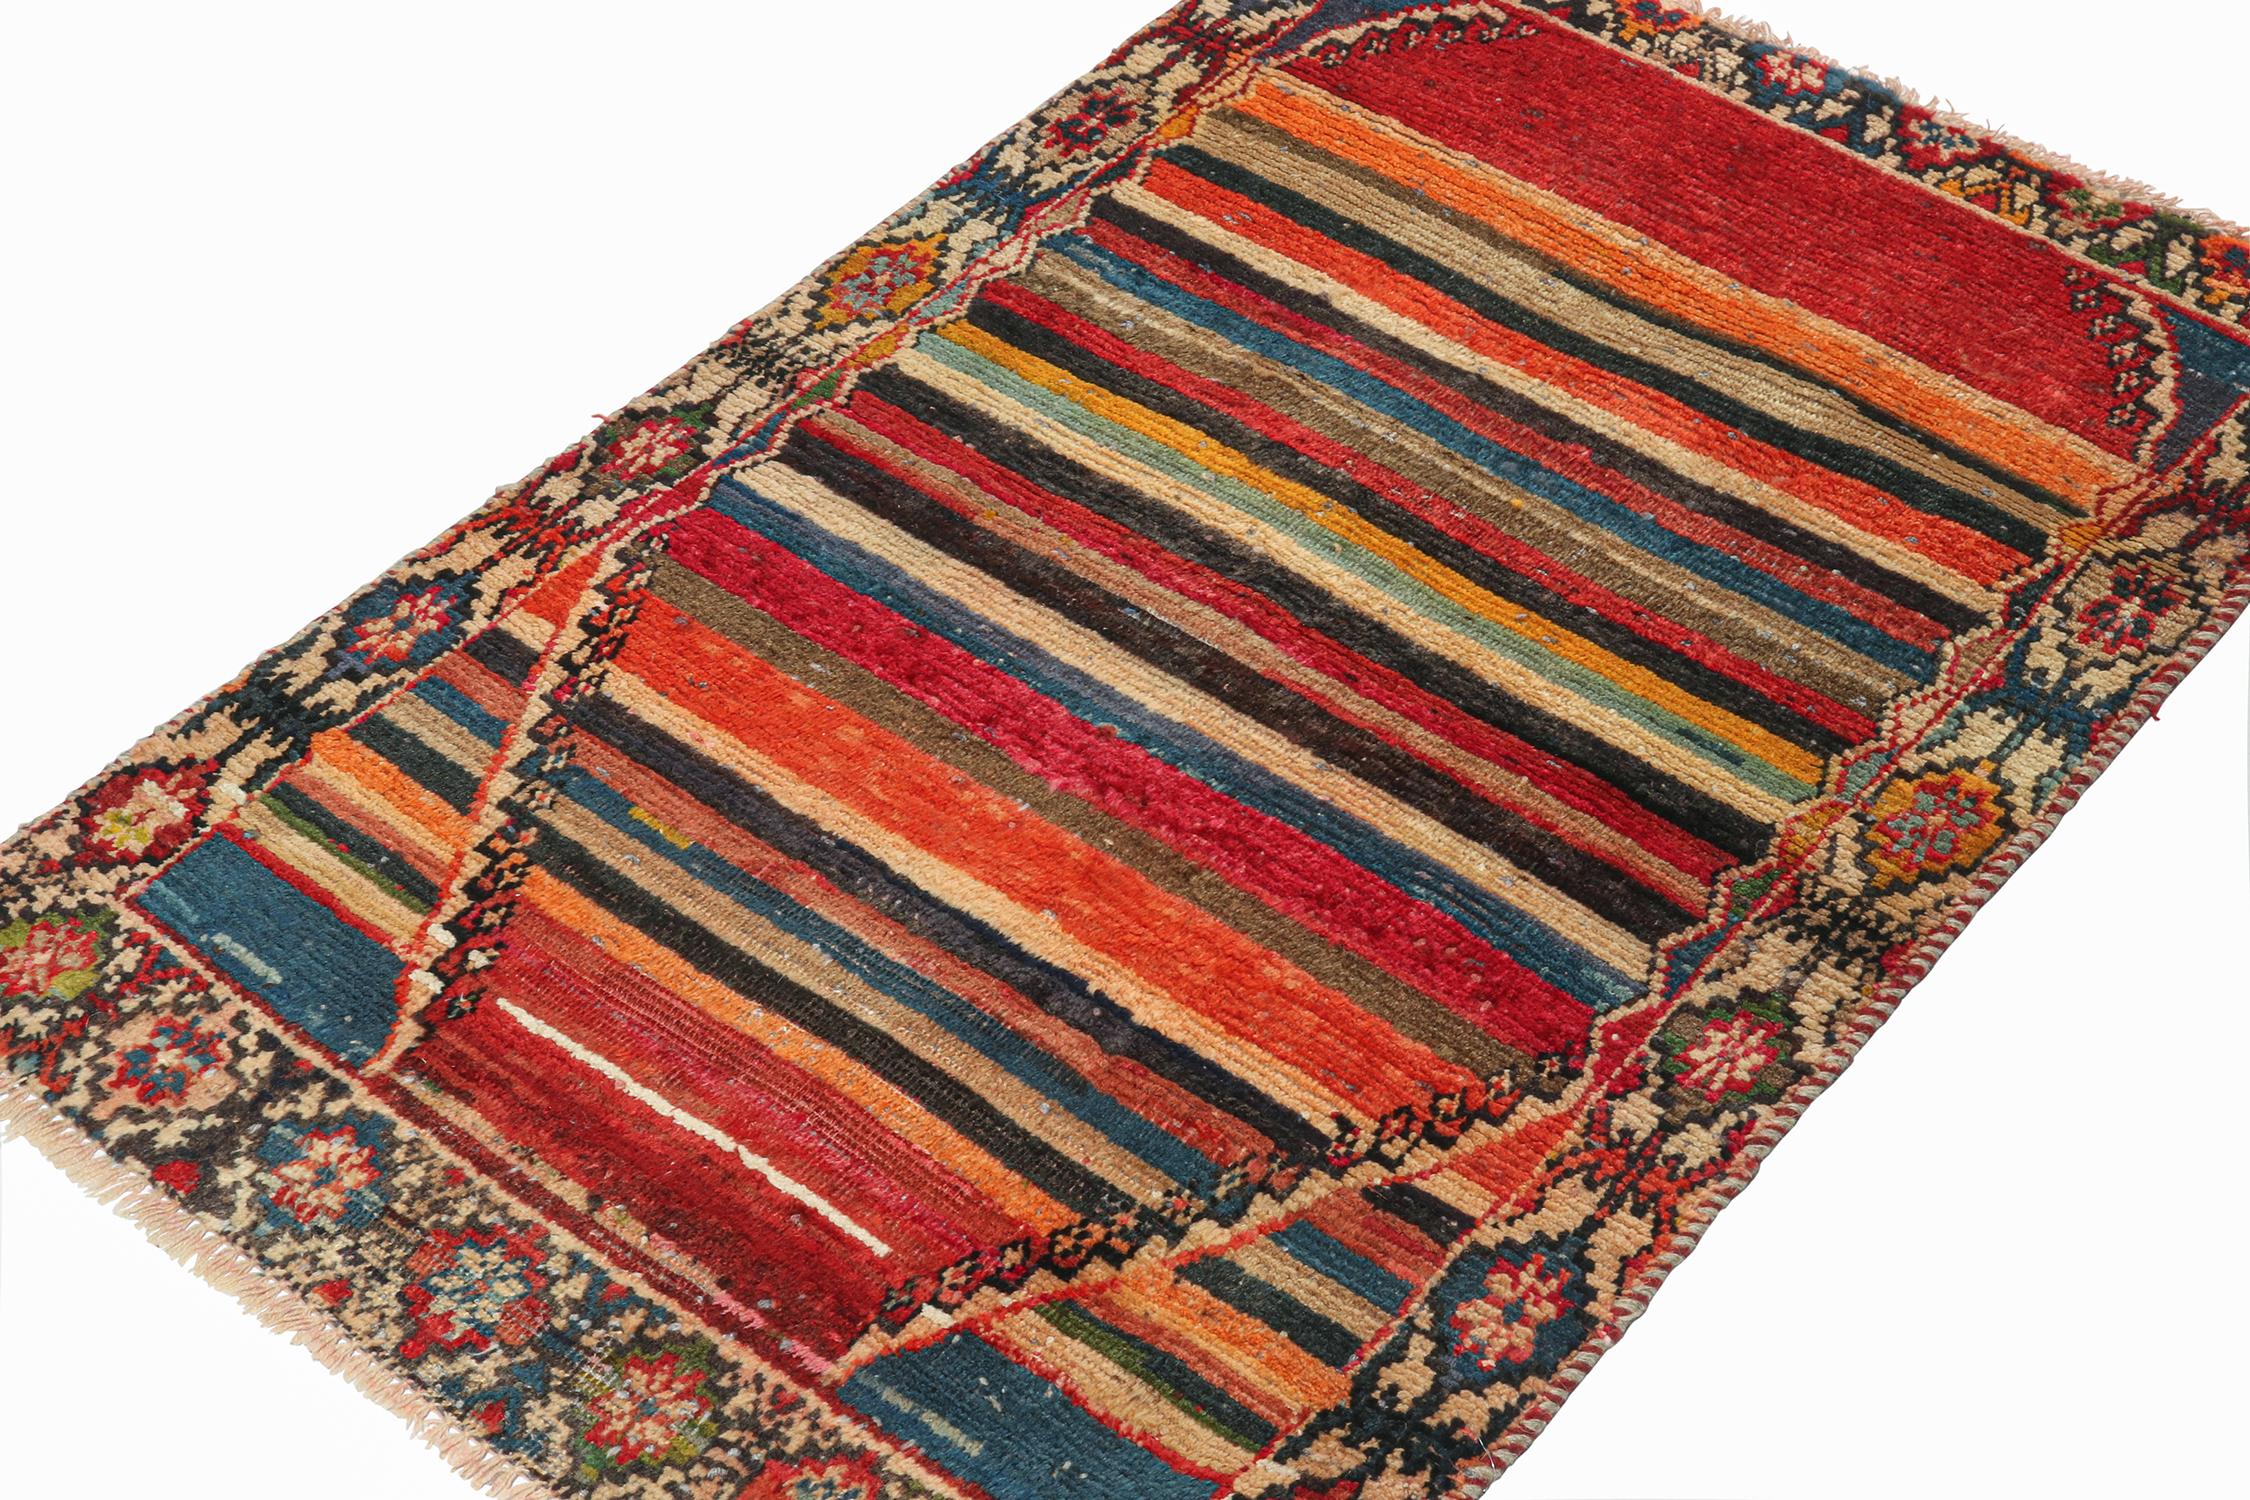 A vintage 3x4 Persian Gabbeh rug, from a grand new entry in Rug & Kilim’s curation of rare tribal pieces. Hand-knotted in wool circa 1950-1960. 

On the design: 

The piece enjoys a most unusual marriage of tribal geometric border and a